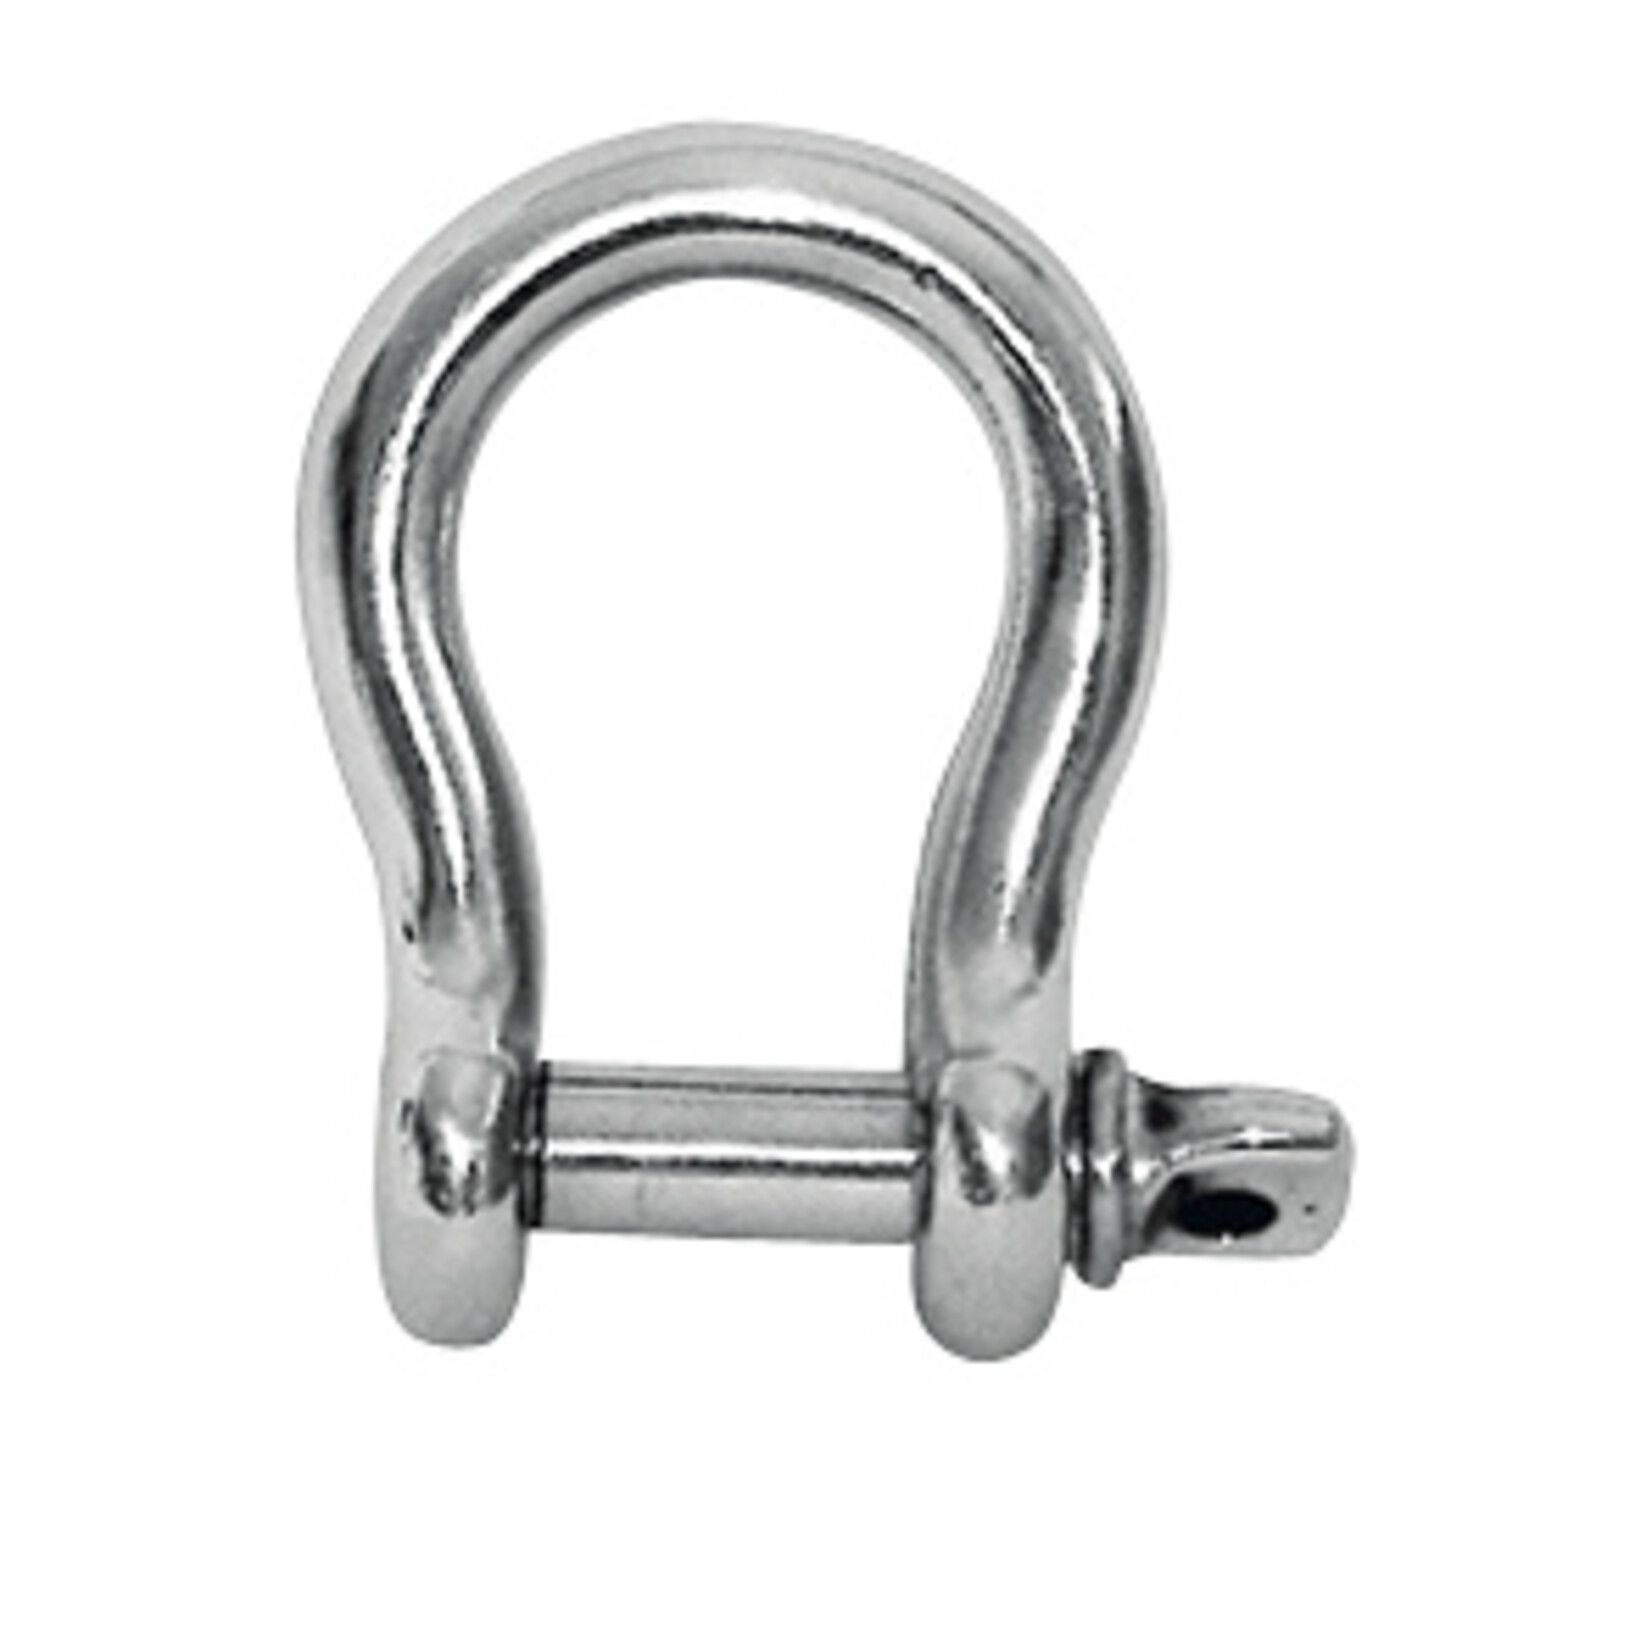 Plastimo St.s bow shackle   d.12mm